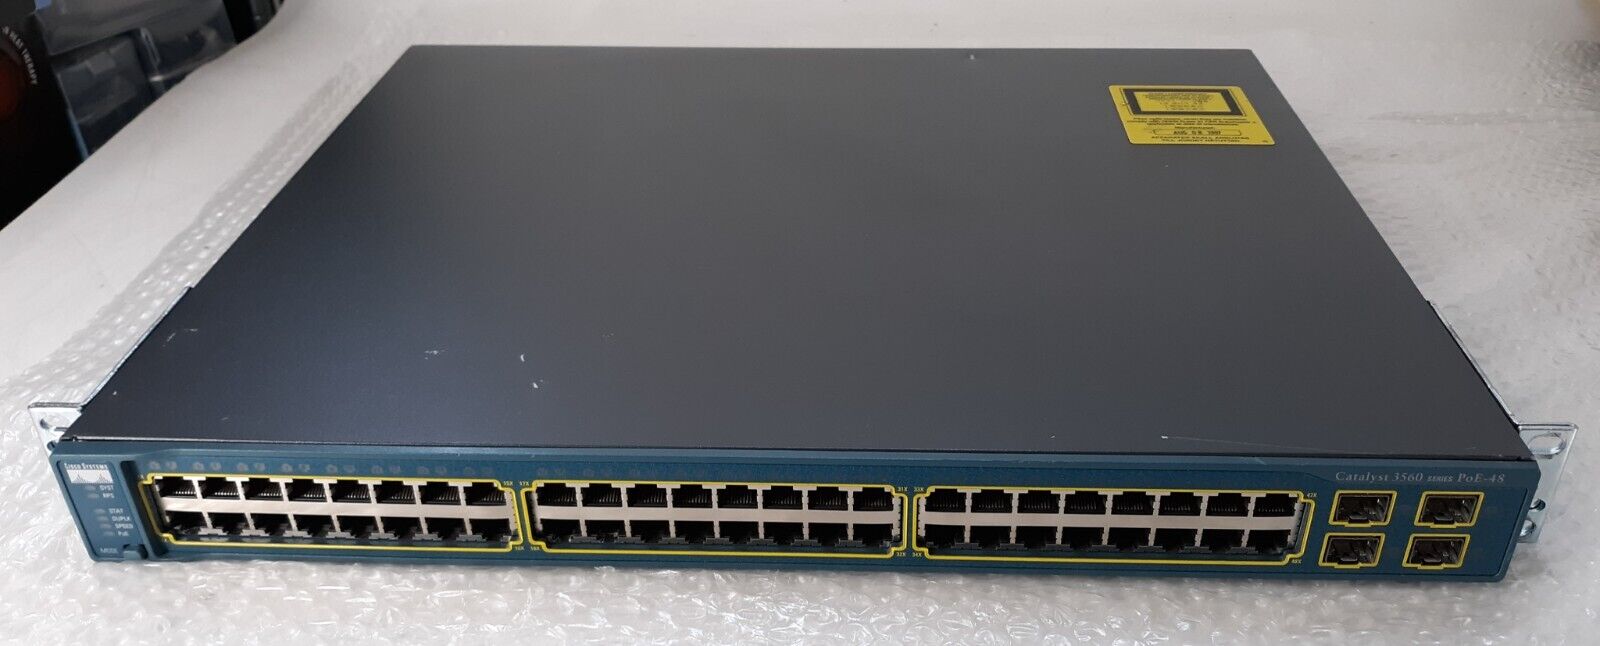 Cisco Catalyst WS-C3560-48PS-S V04 Ethernet Switch w/ Ears + Cord